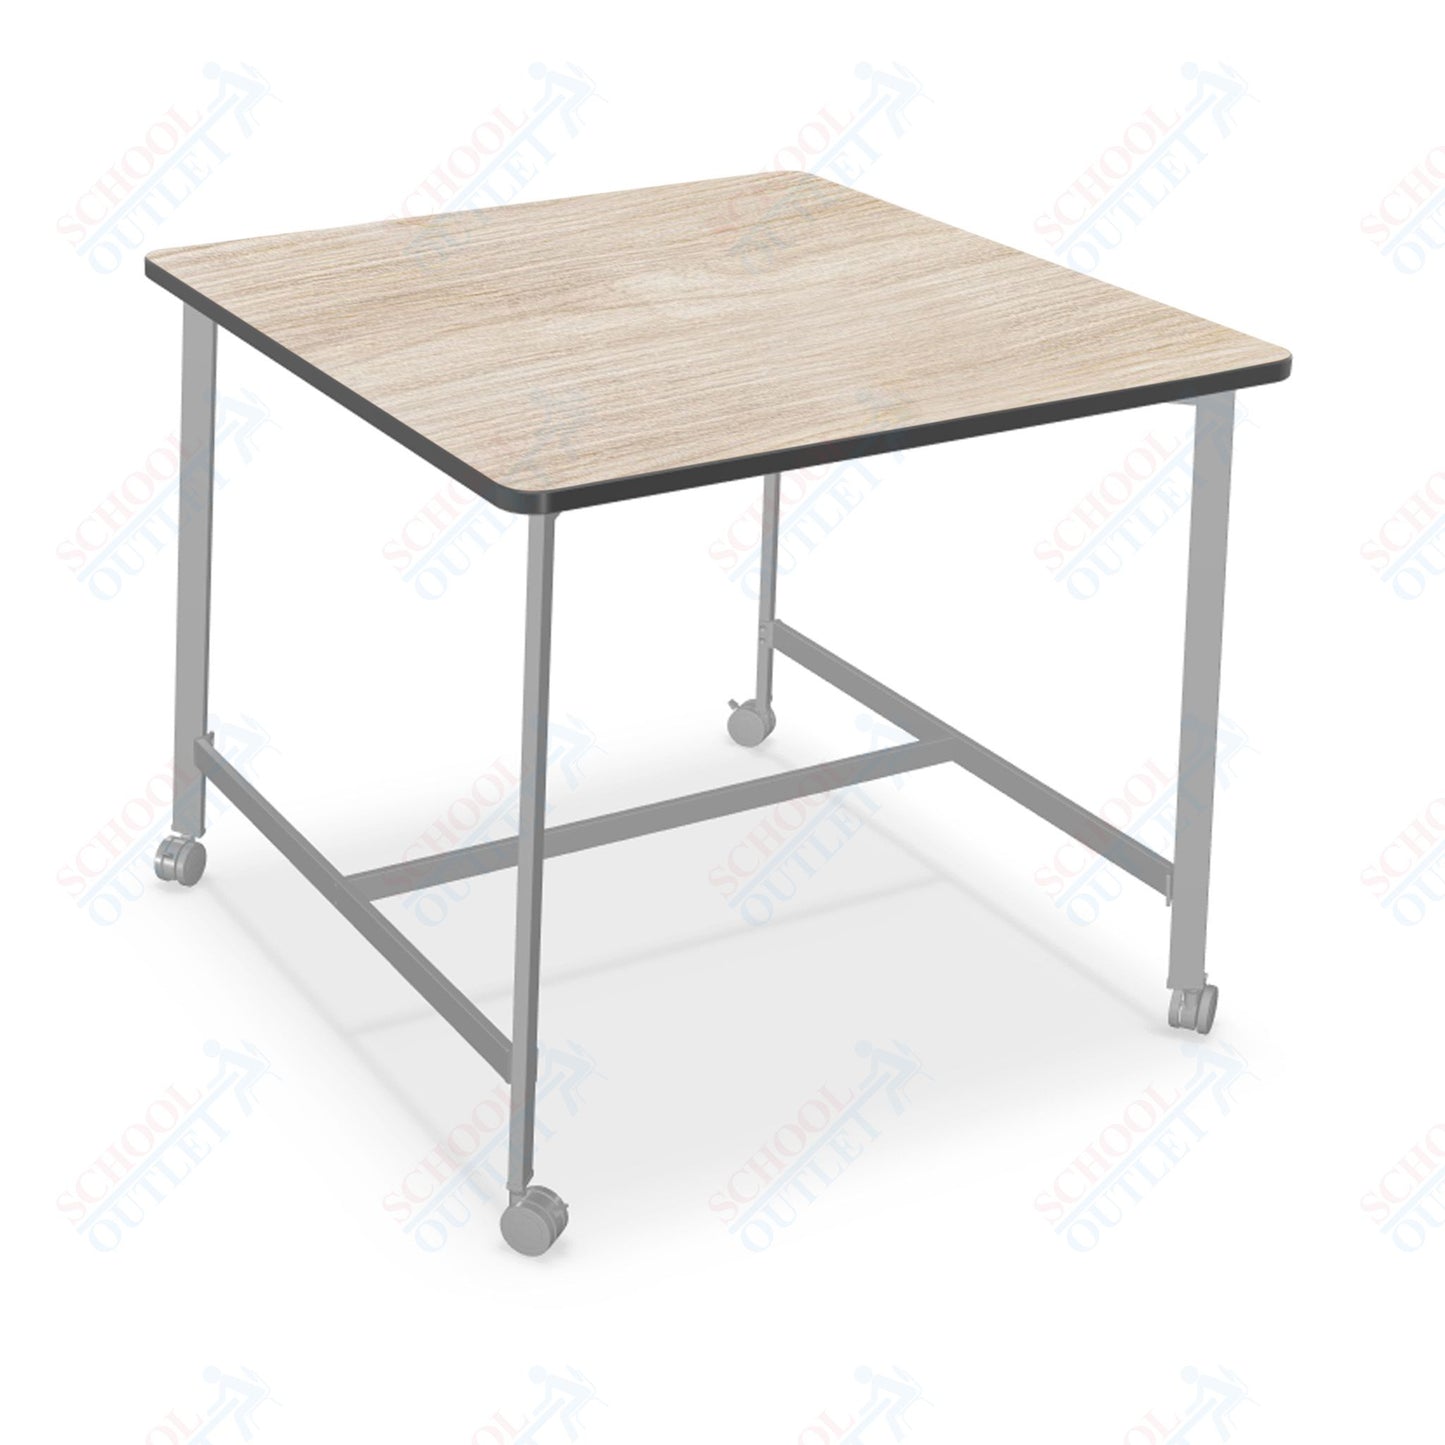 Mooreco Akt Table – 48" Square, Laminate Top, Fixed Height Available in 29"H, 36"H, or 42"H